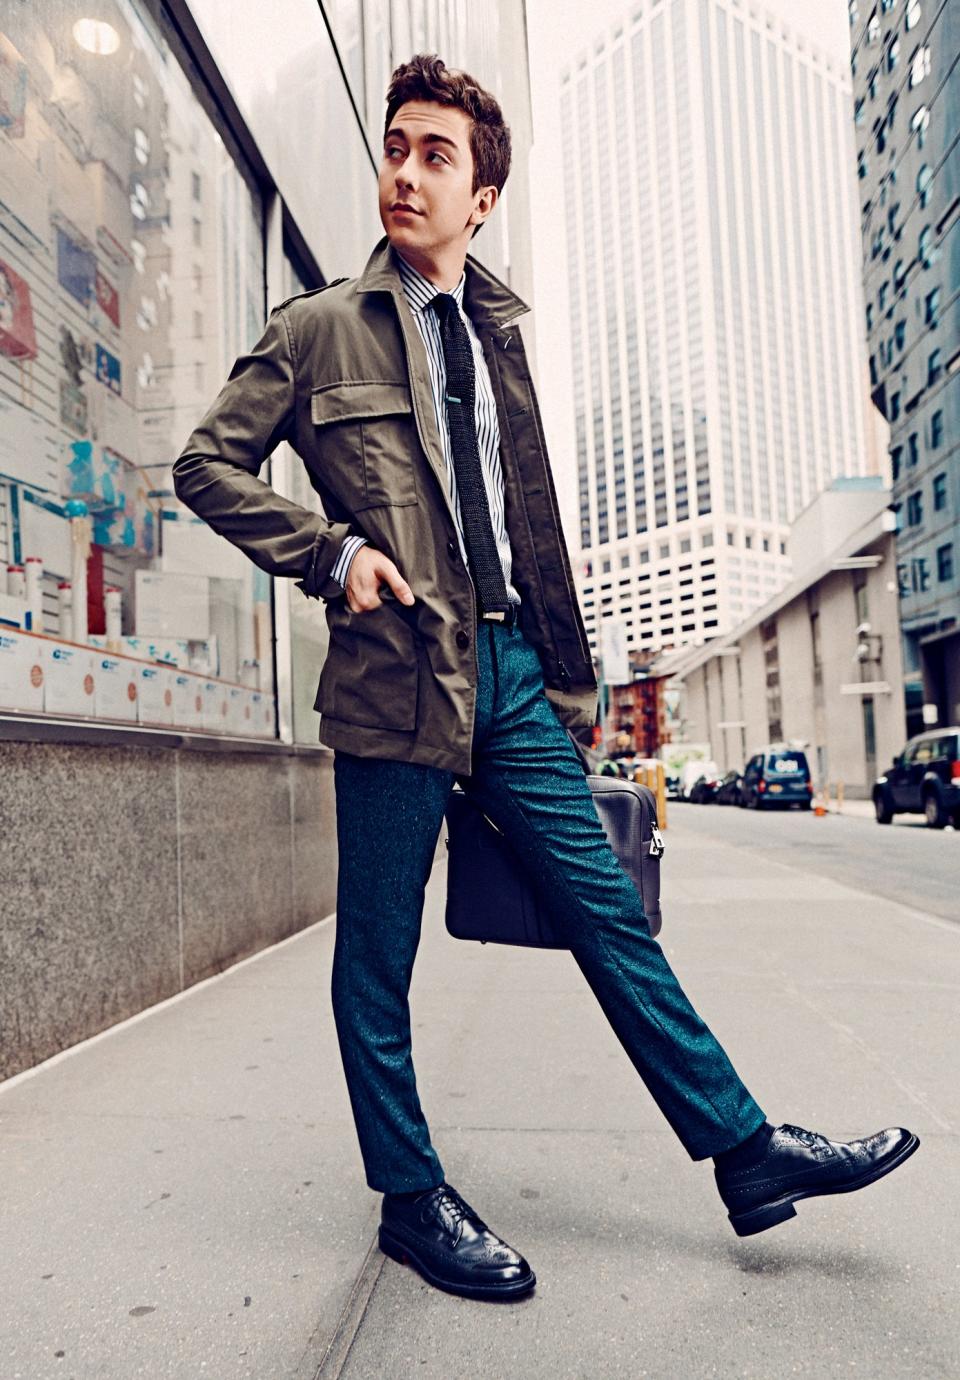 A utility jacket that can do it all.